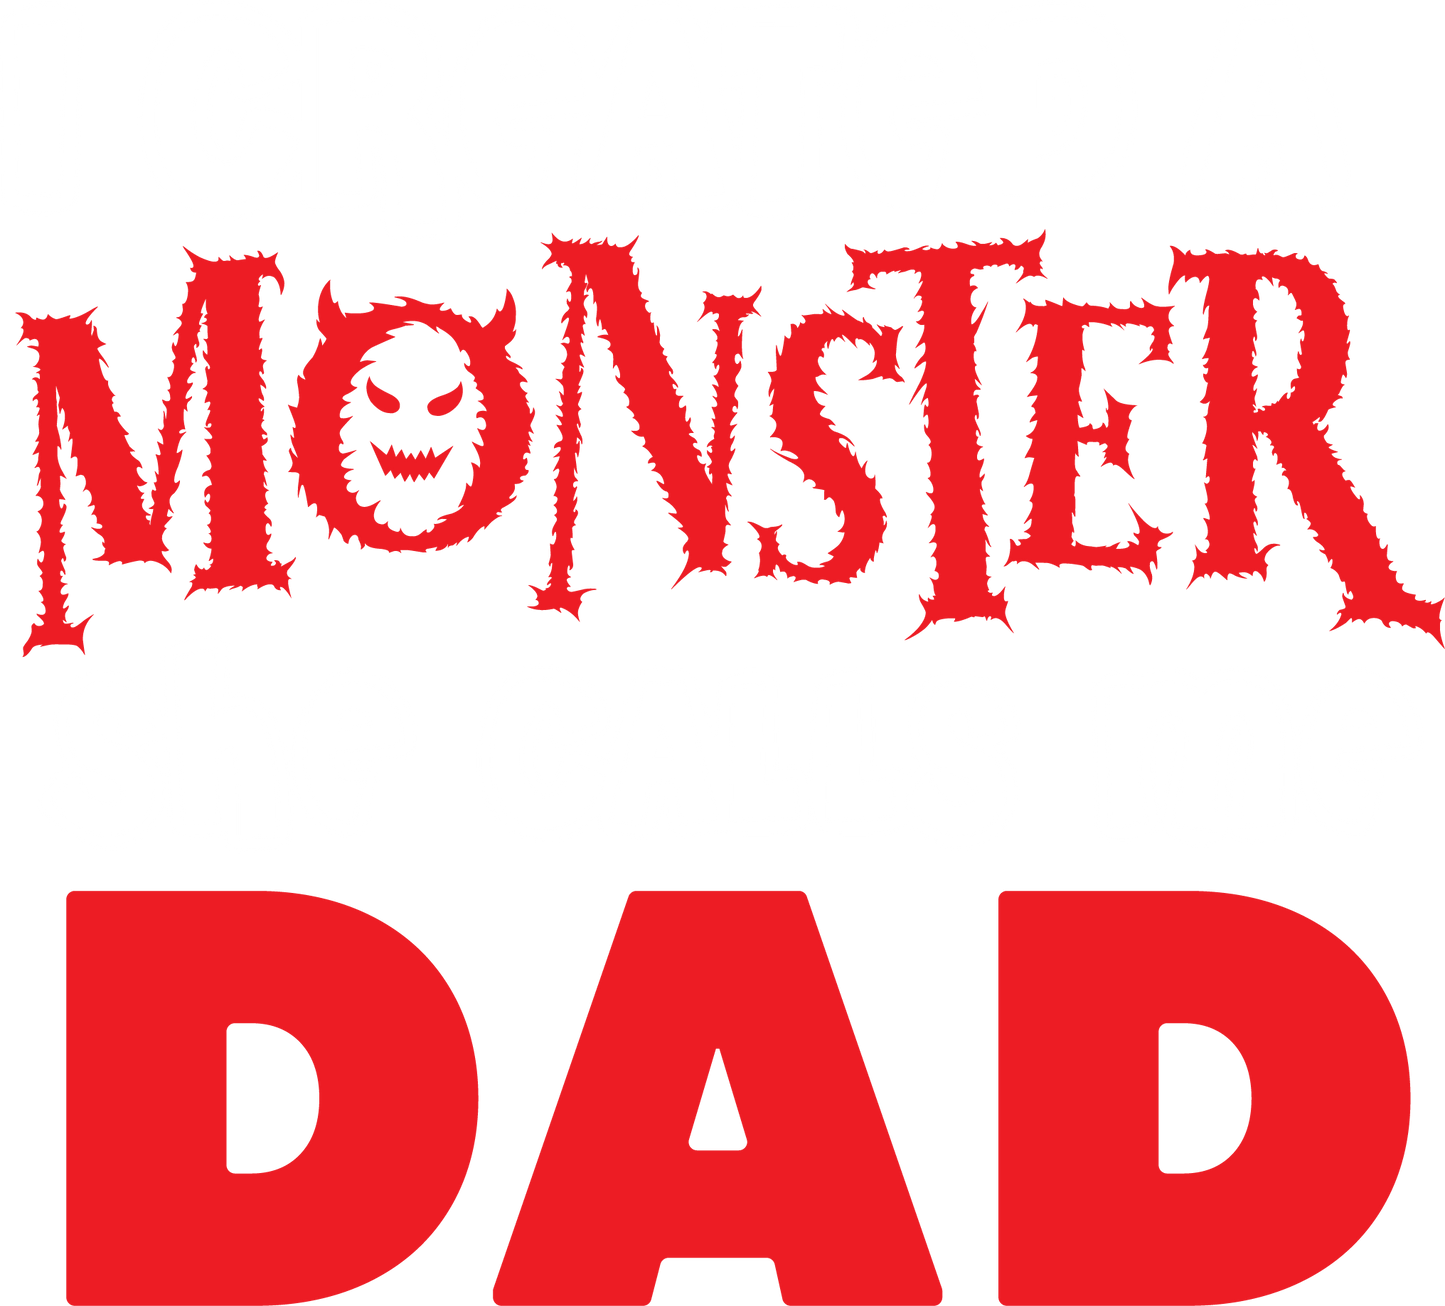 I created a Monster, She Calls me Dad